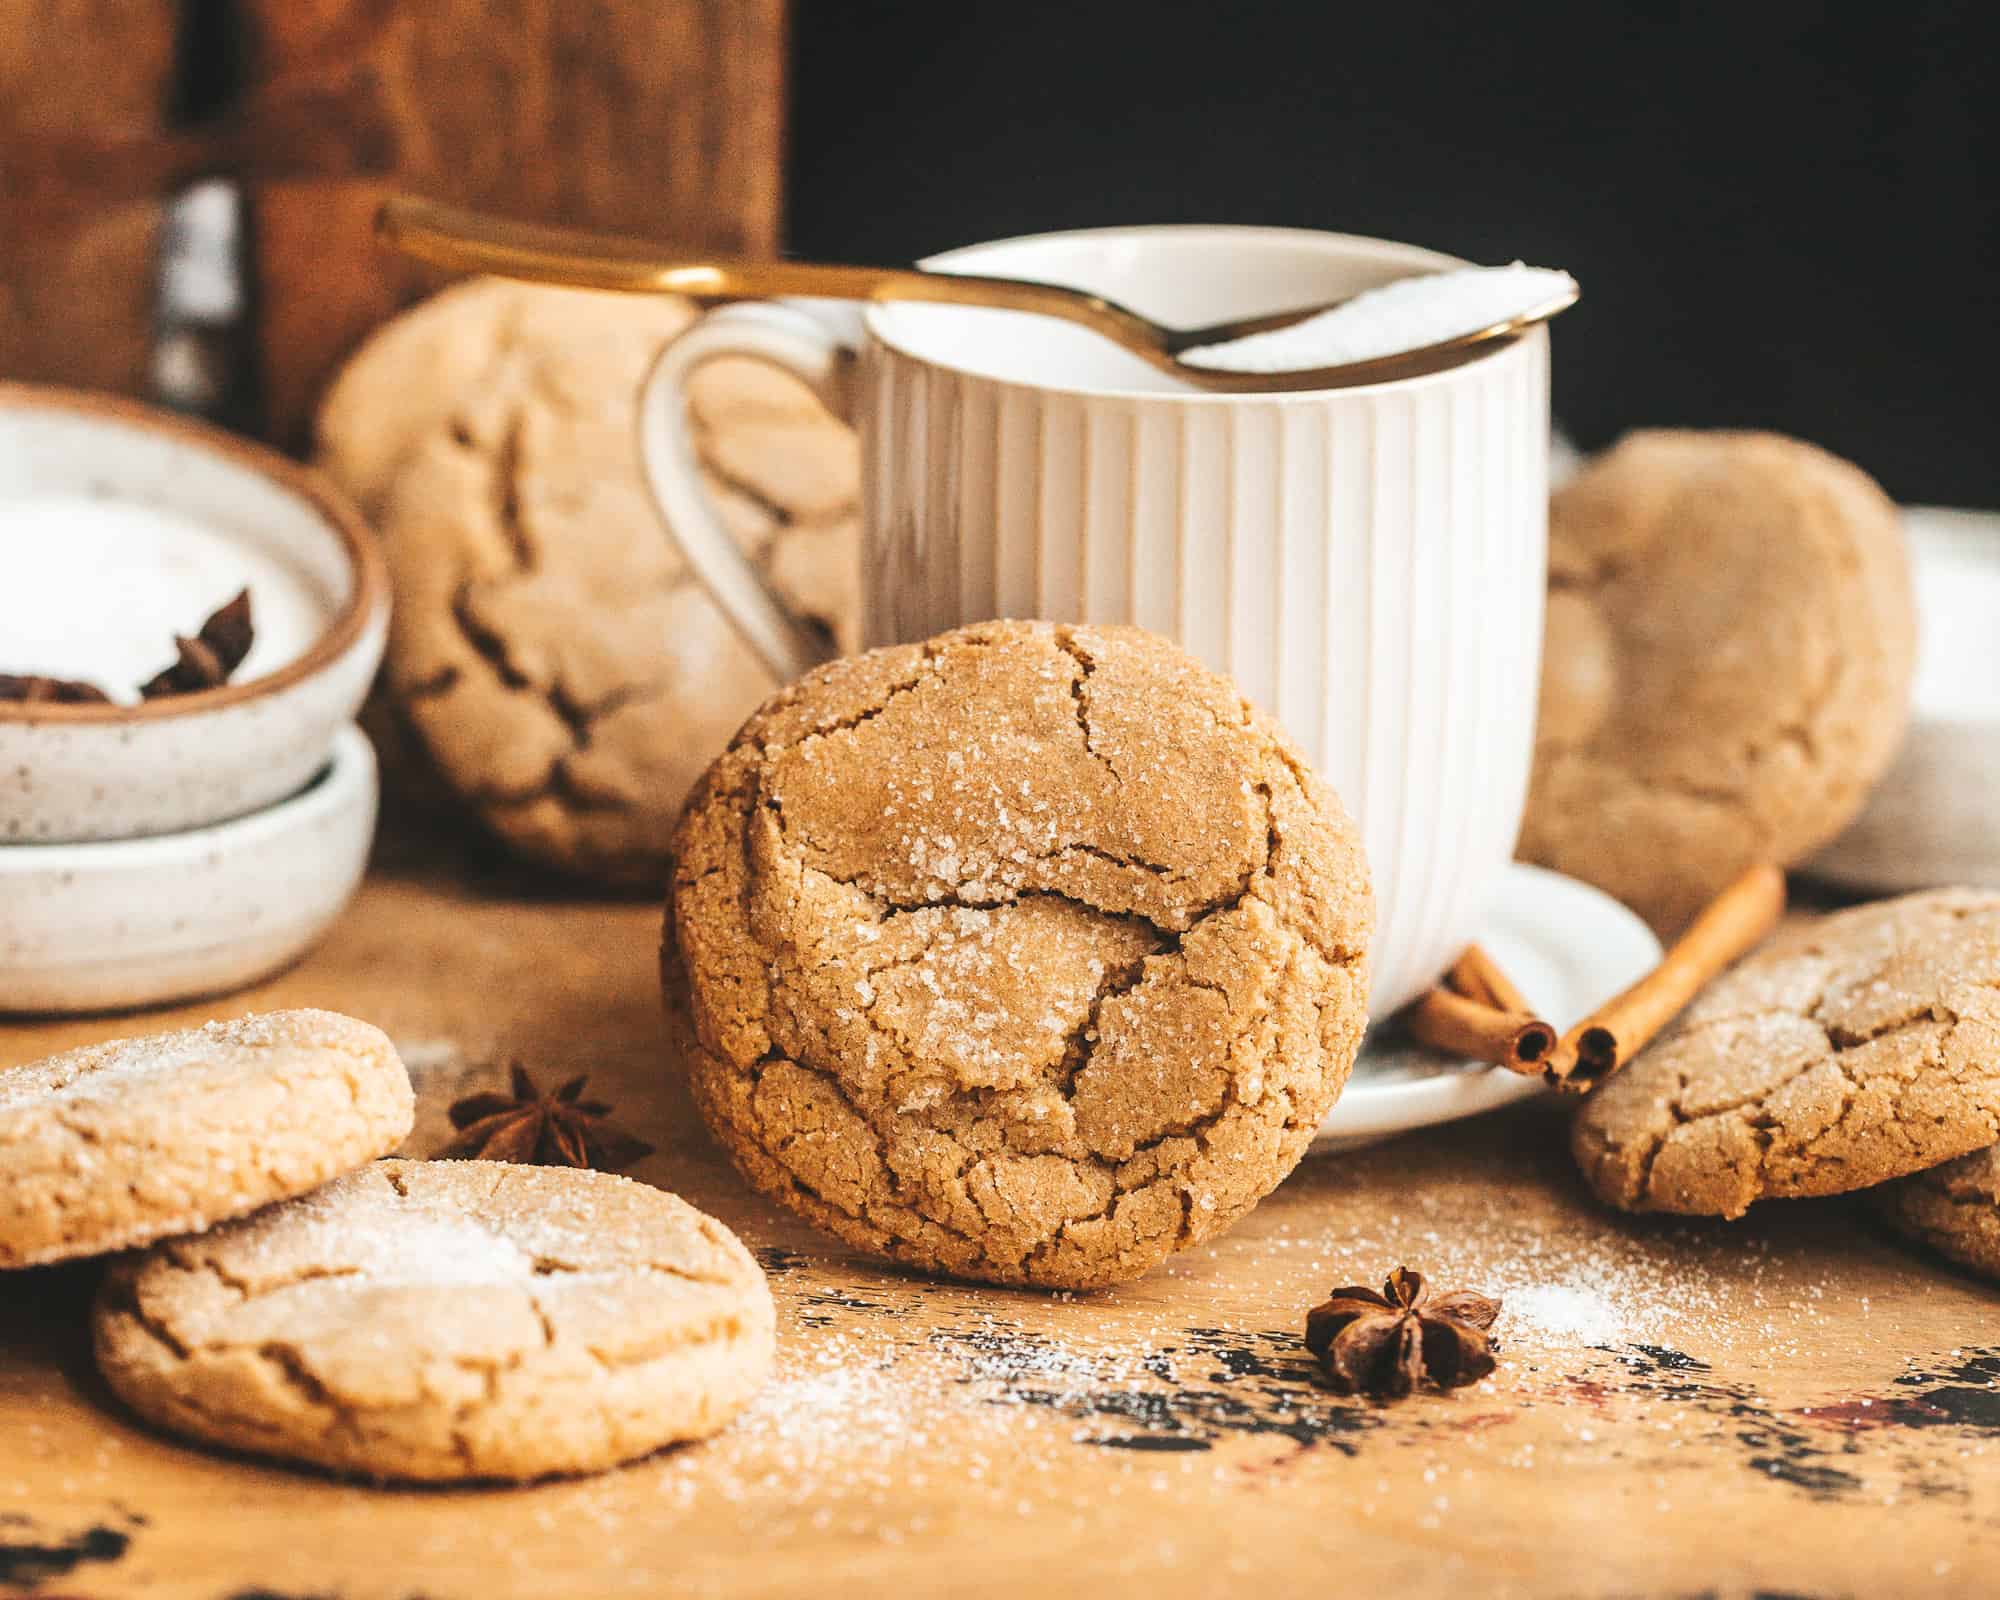 Cookies in front of a coffee mug